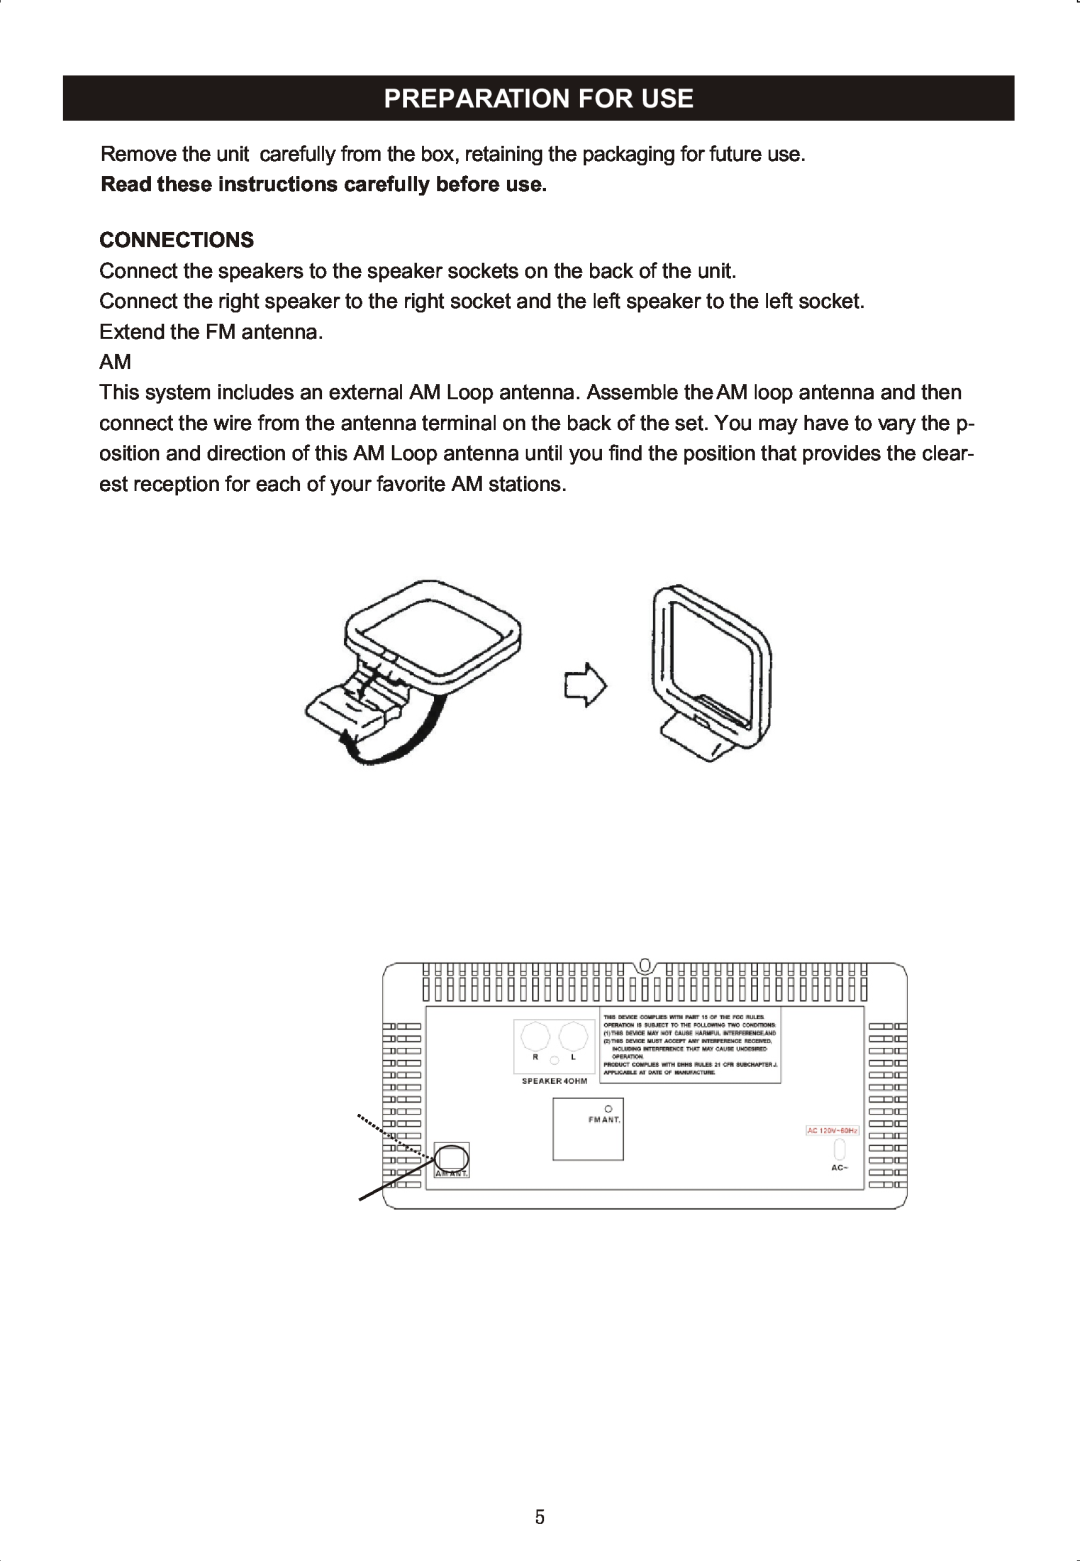 Curtis RCD-718 instruction manual Preparation For Use, Read these instructions carefully before use, Connections 